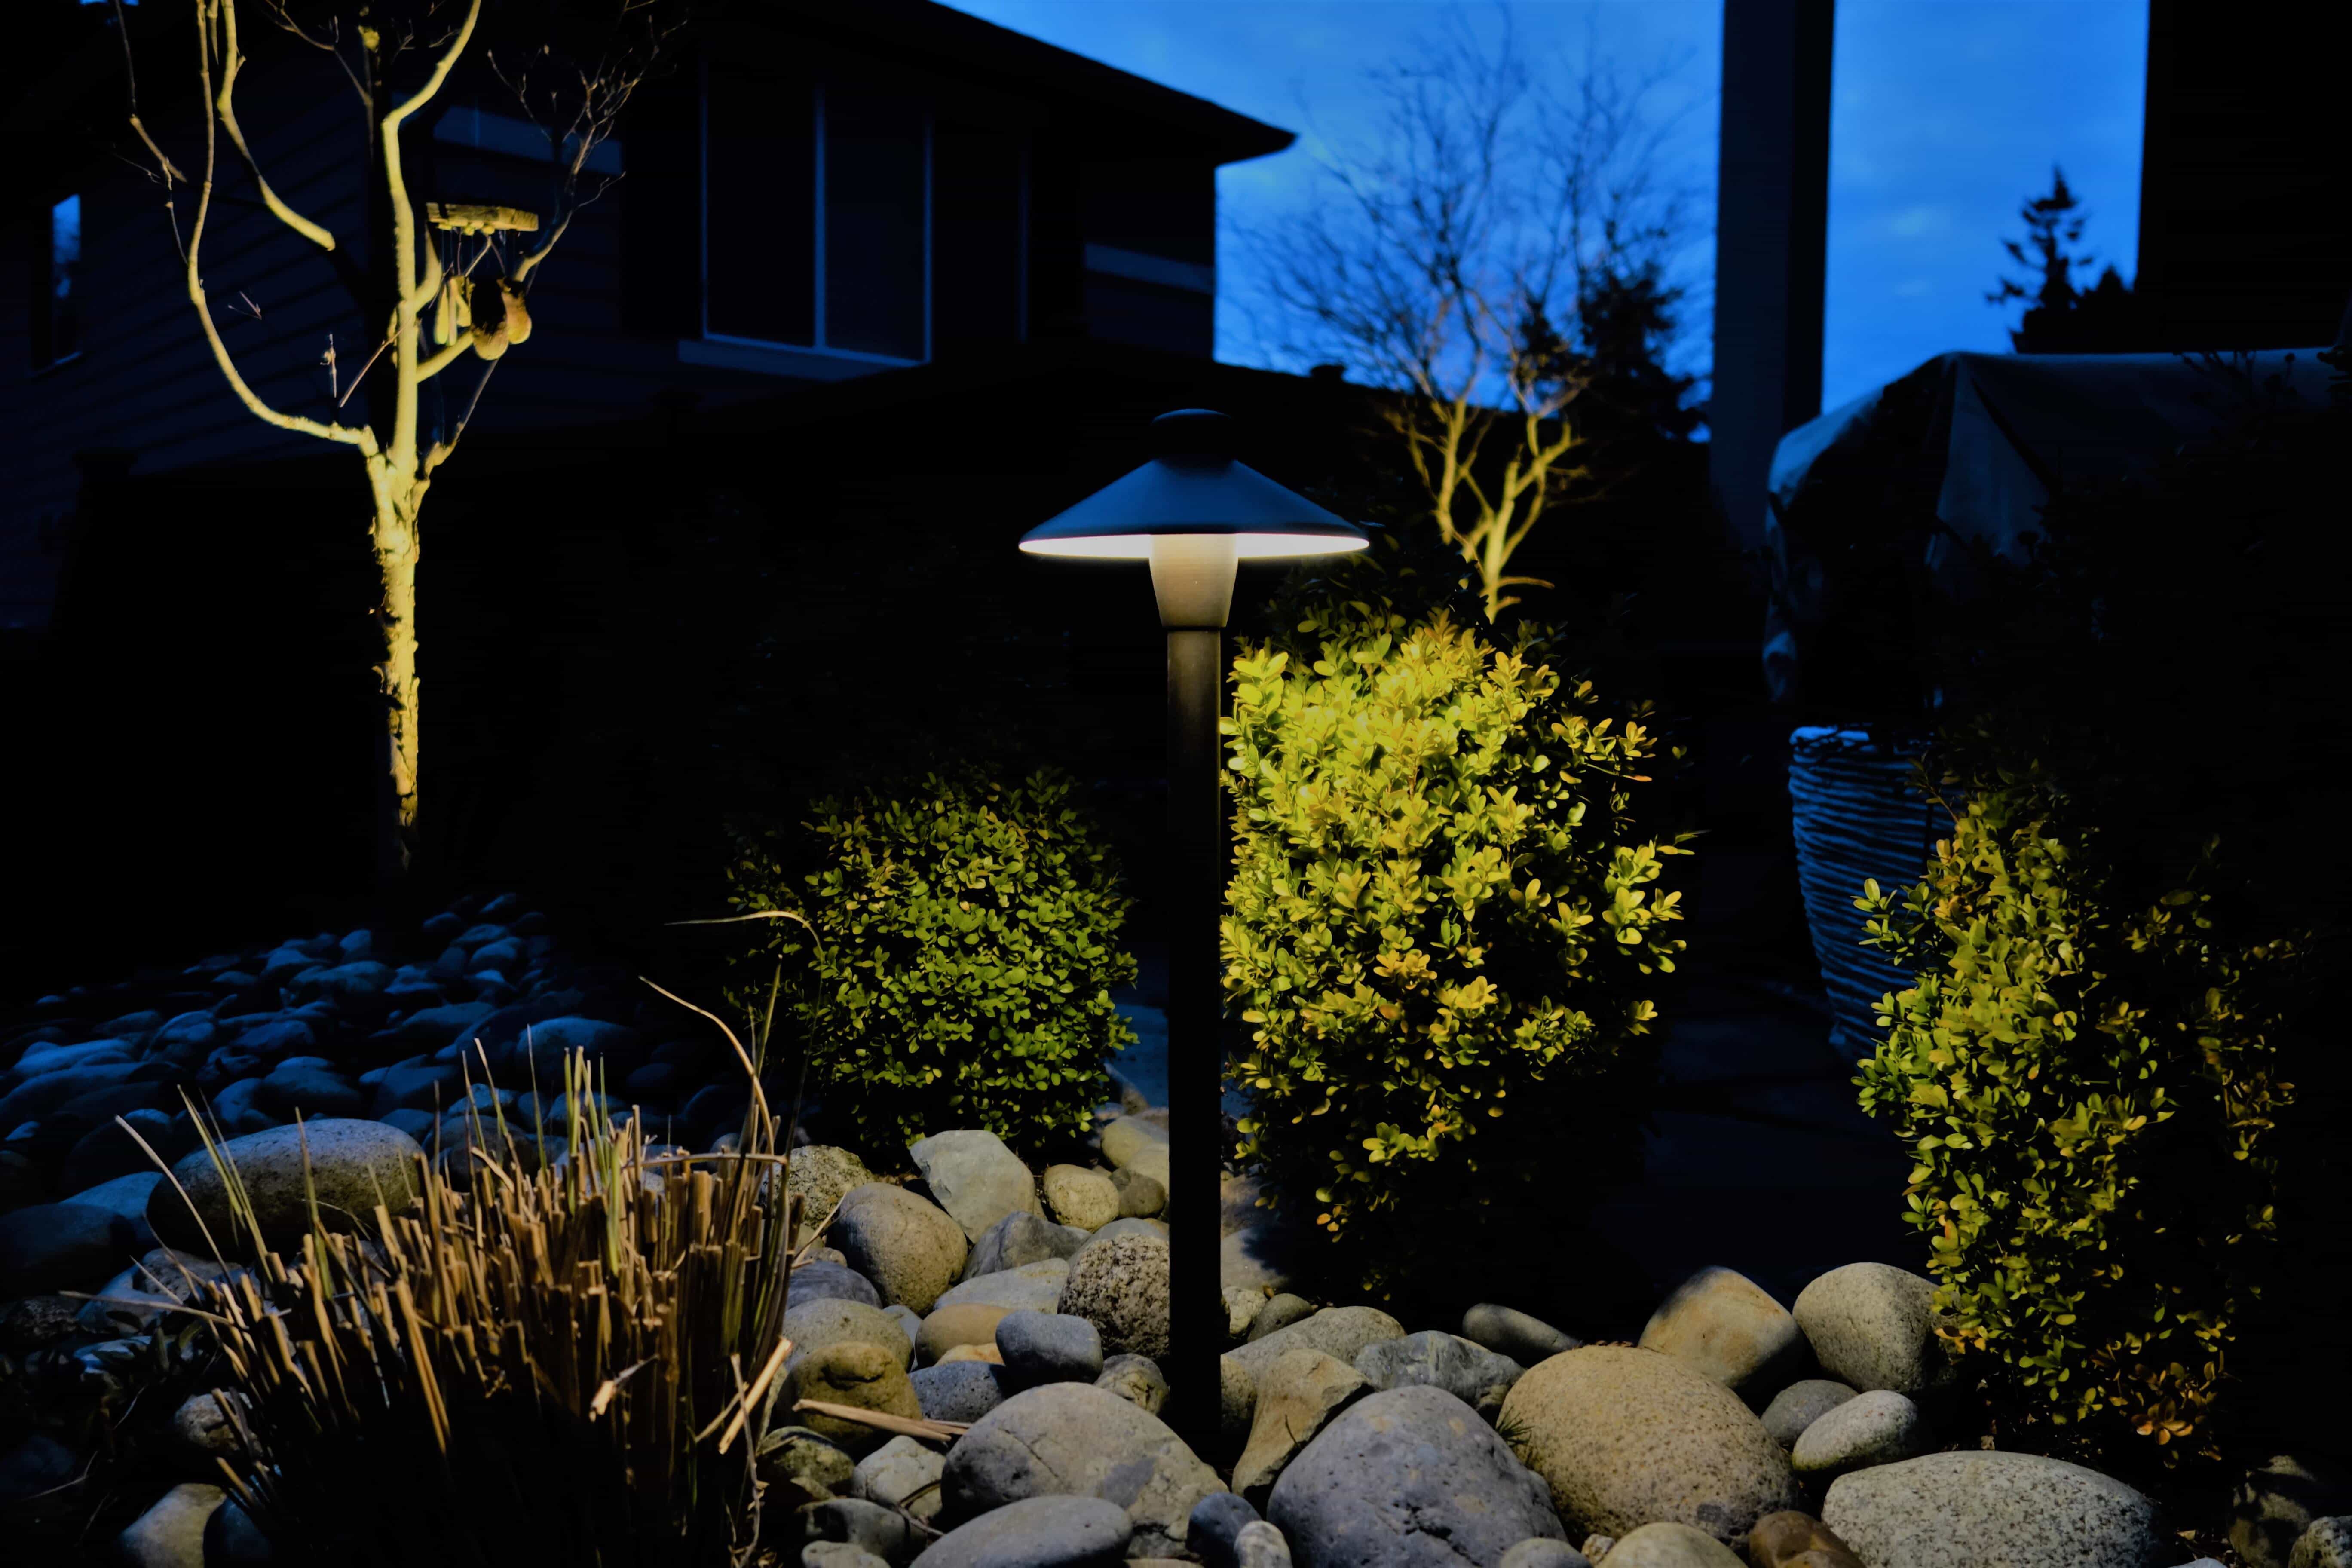 Rocks and greenery with landscape lighting